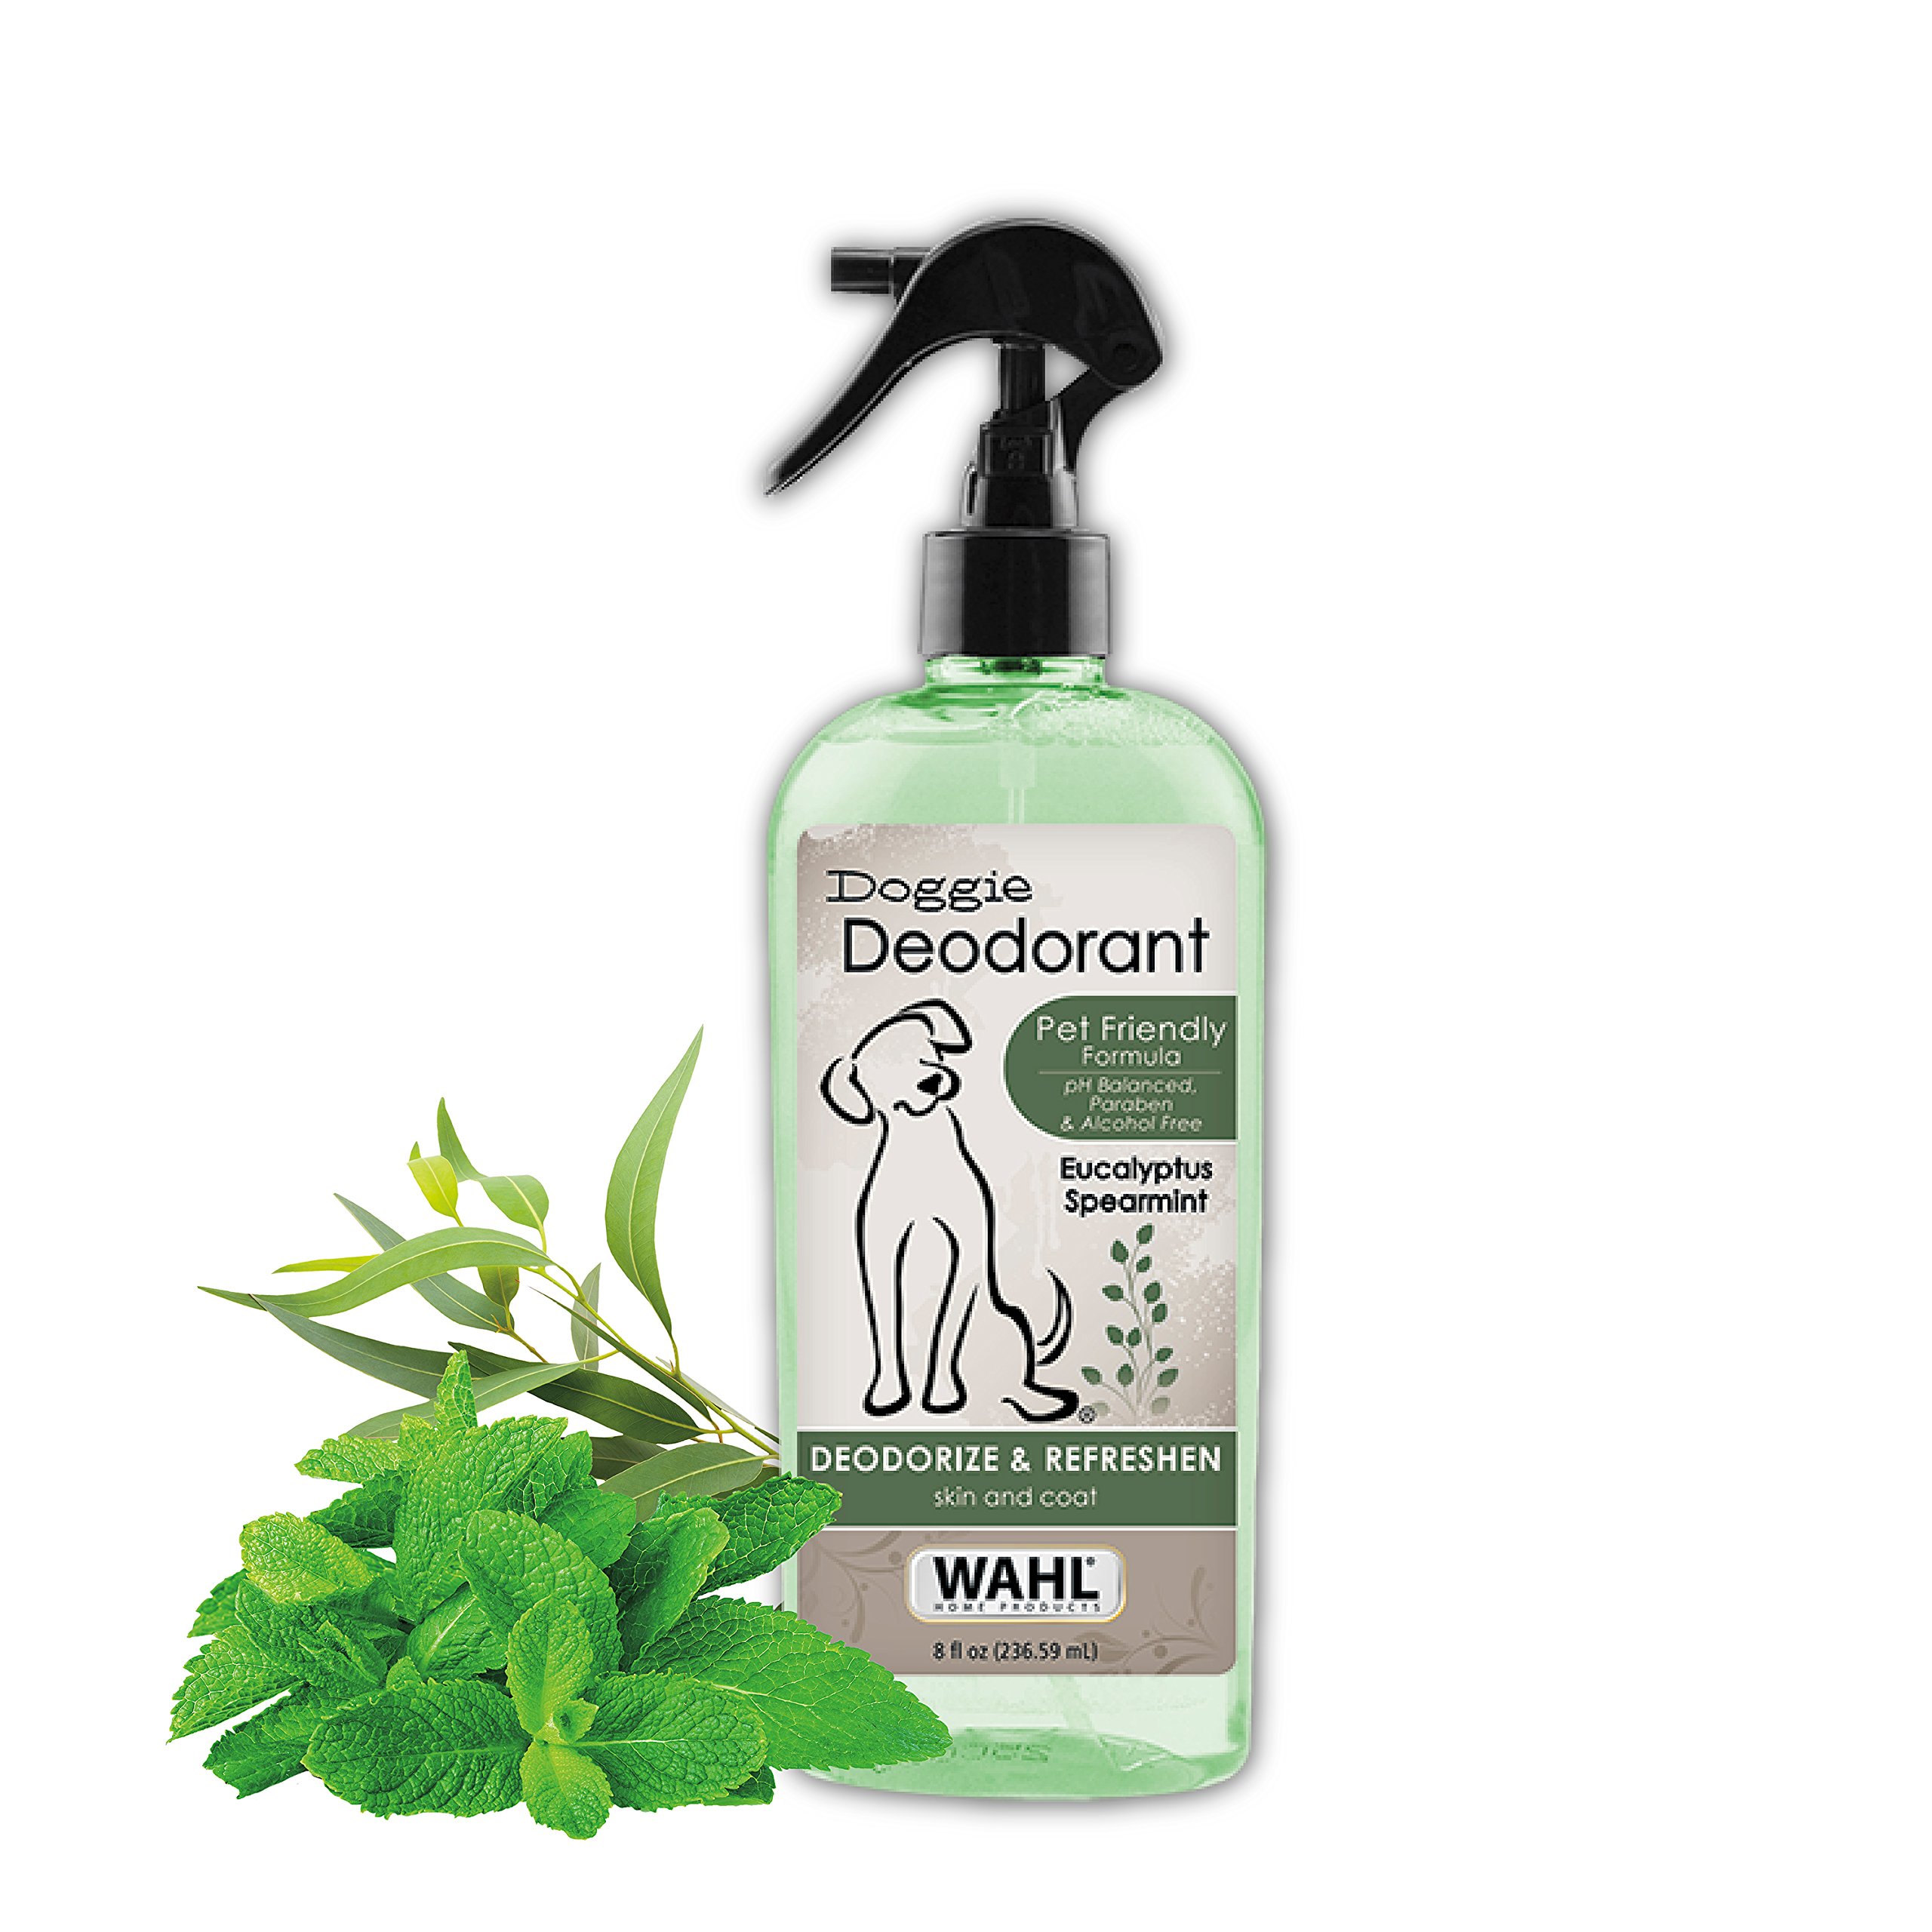 Deodorizers - Dog Groomer Cleaning Supplies - Dog Grooming